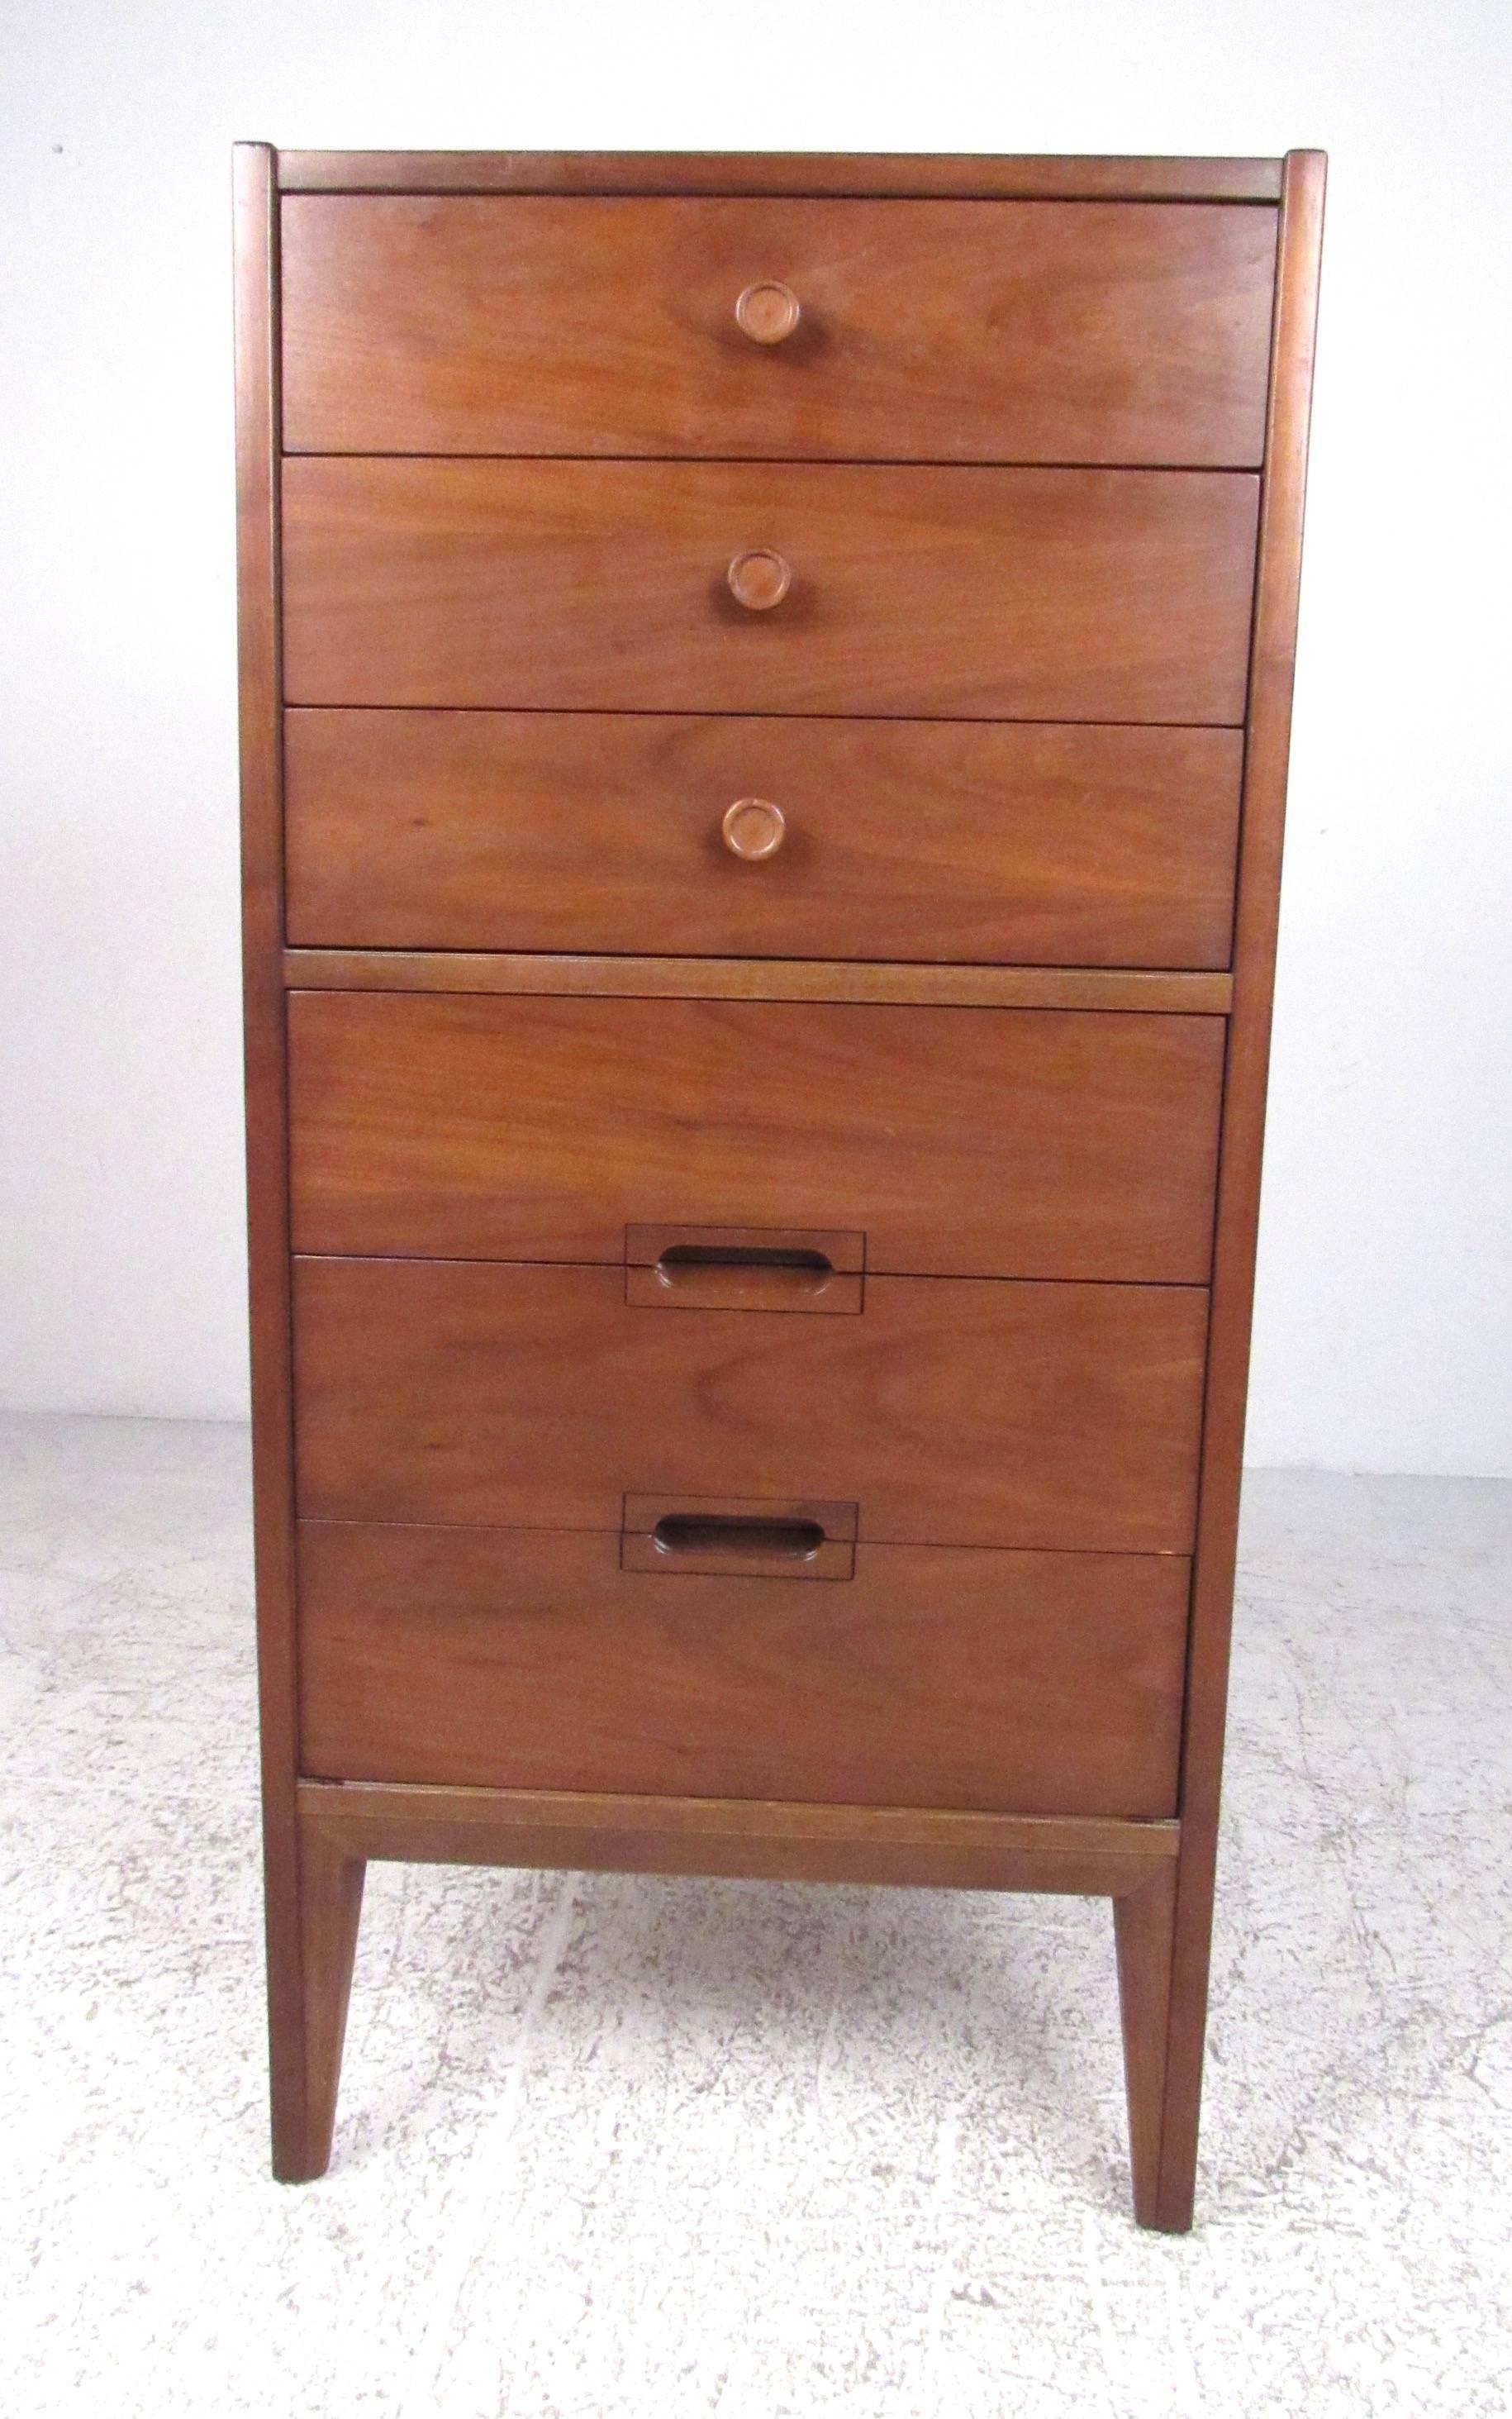 Narrow and tall, this six-drawer walnut dresser is both functional and an attractive Mid-Century Modern furnishing. Please confirm item location (NY or NJ) with dealer.